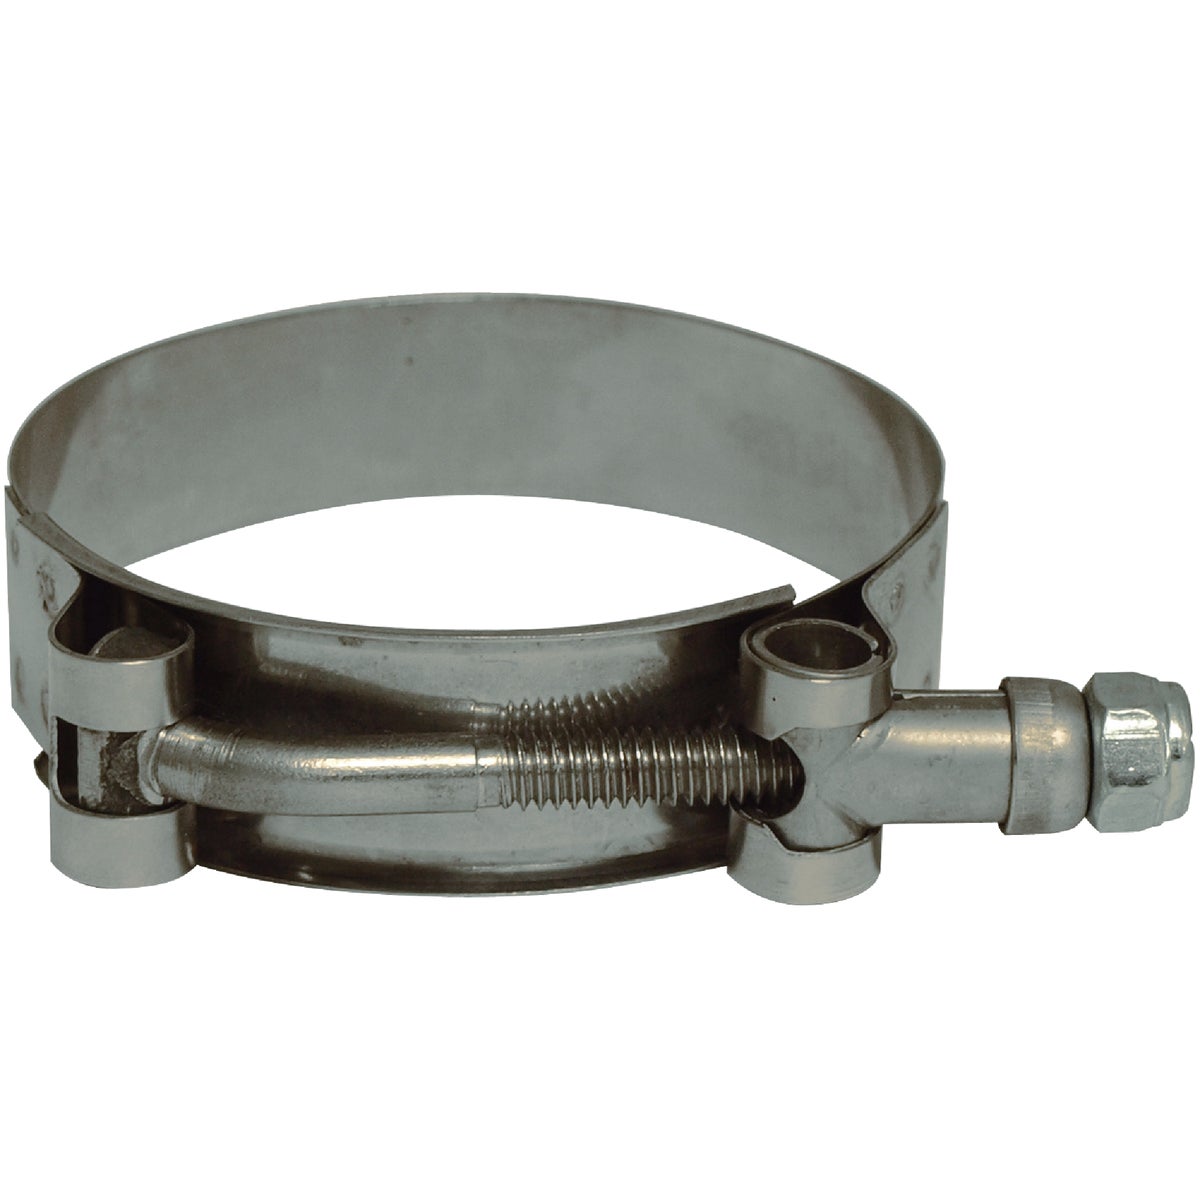 Apache 2-3/16 In. x 2-1/2 In. Stainless Steel T-Bolt Clamp